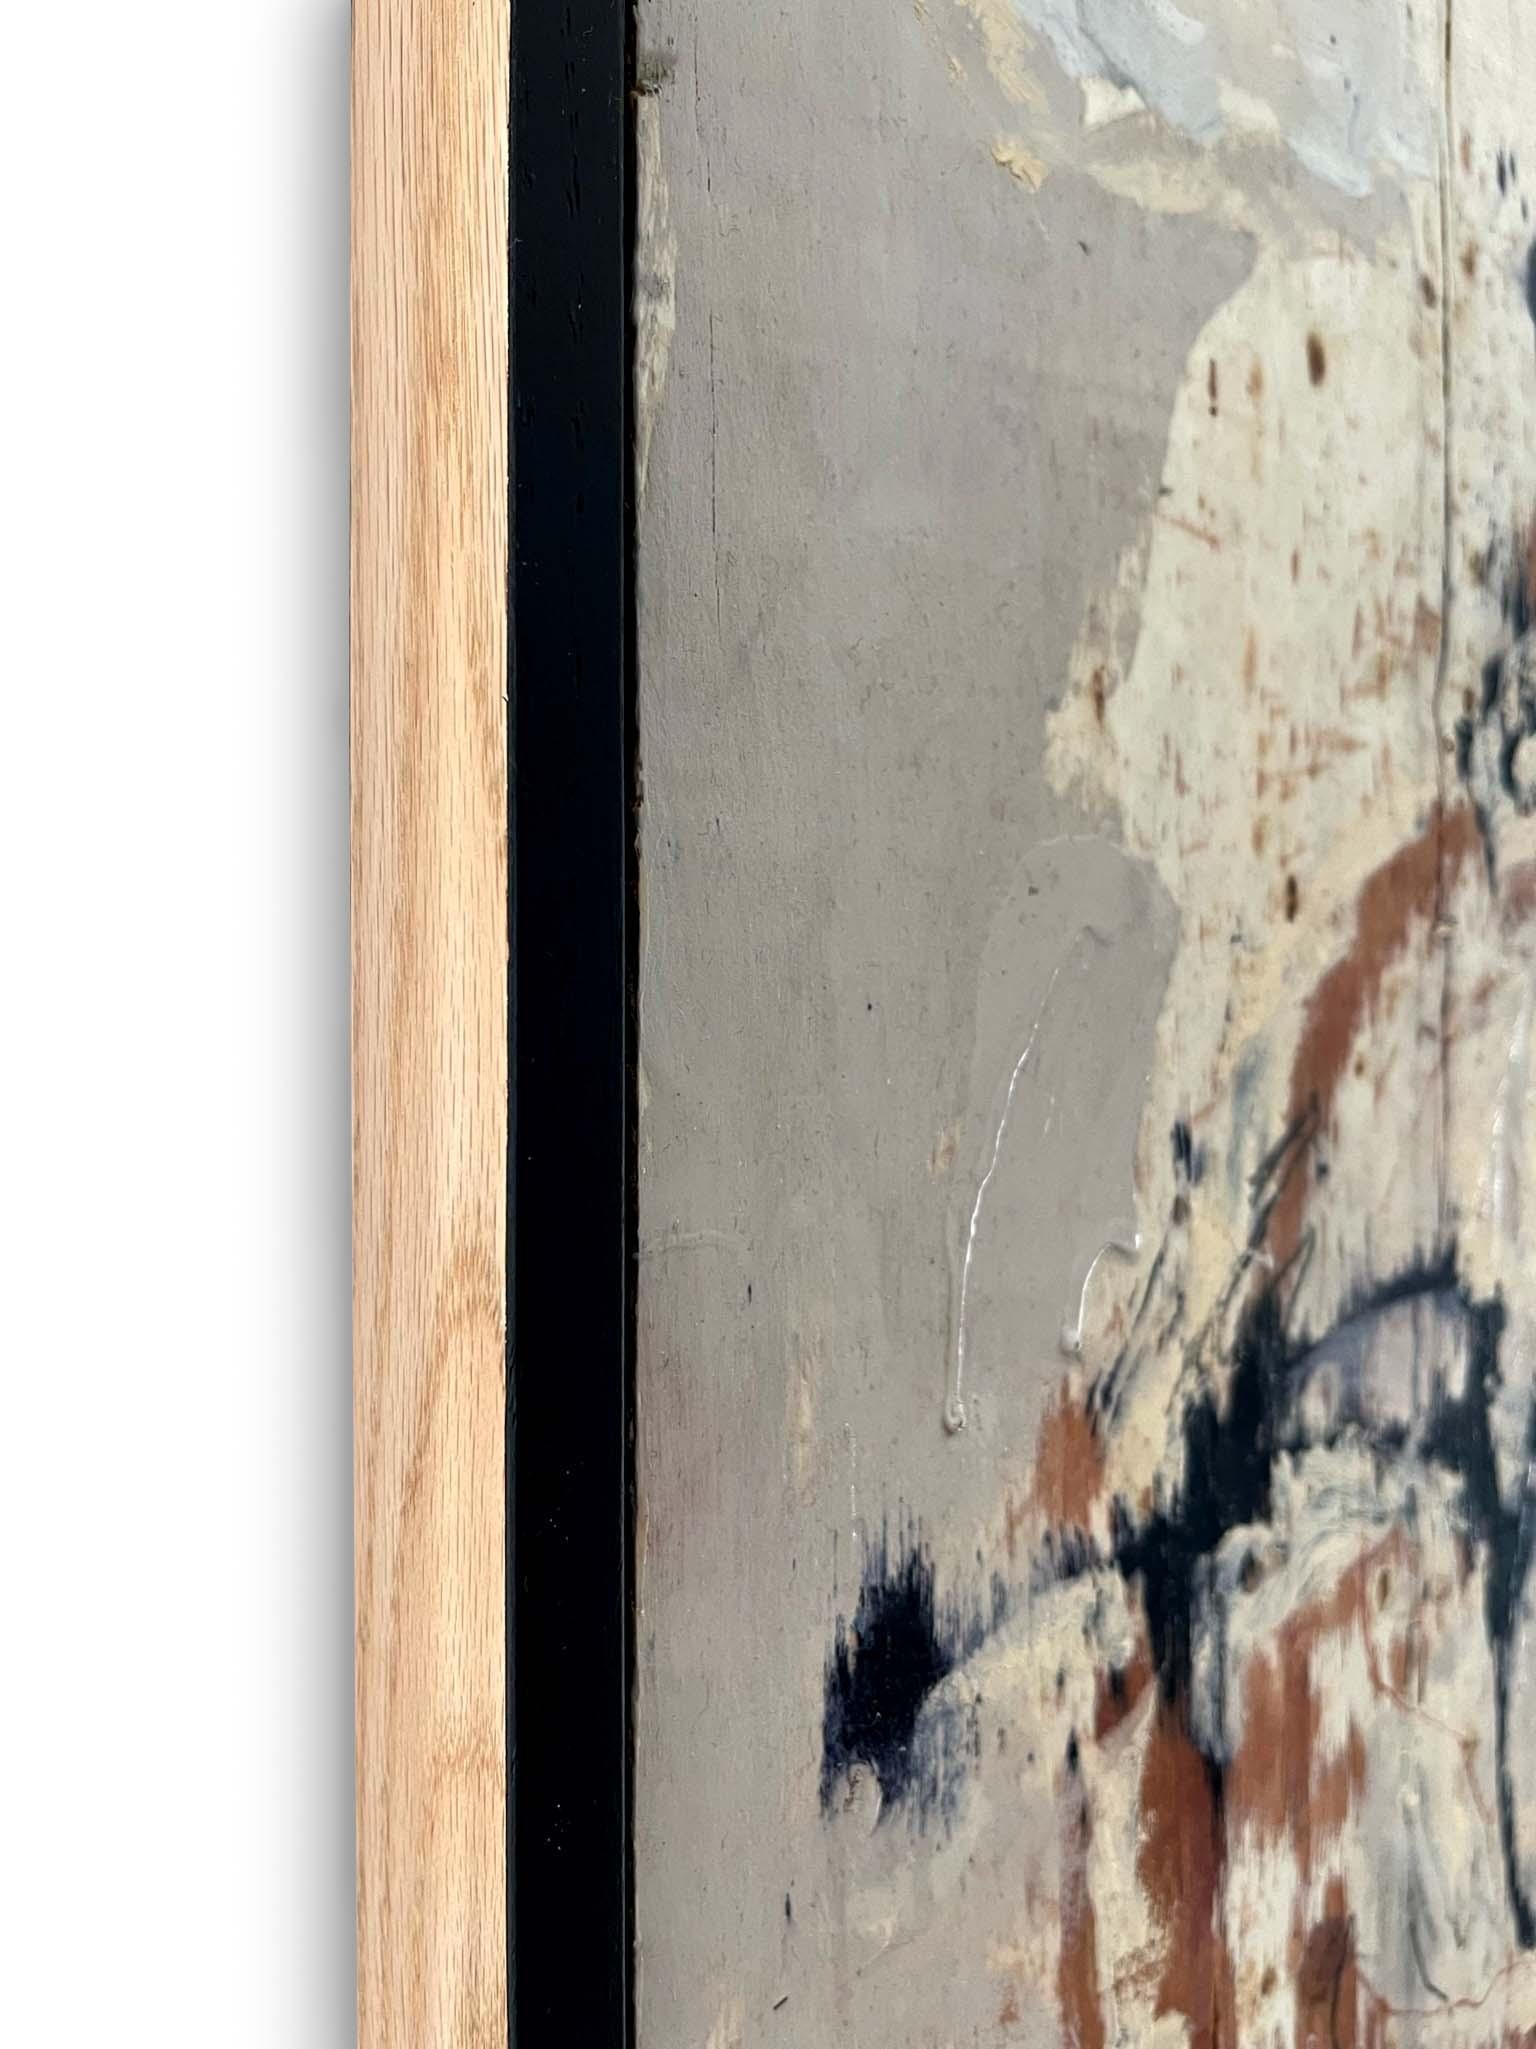 PARTIALLY
2021

Abstract, custom framed painting. Neutral, earth toned color palette of black and brown india ink.  

Embracing the imperfections of reclaimed objects aged over time, Evans uses a piece of imperfect, found wood as his surface.  Signs